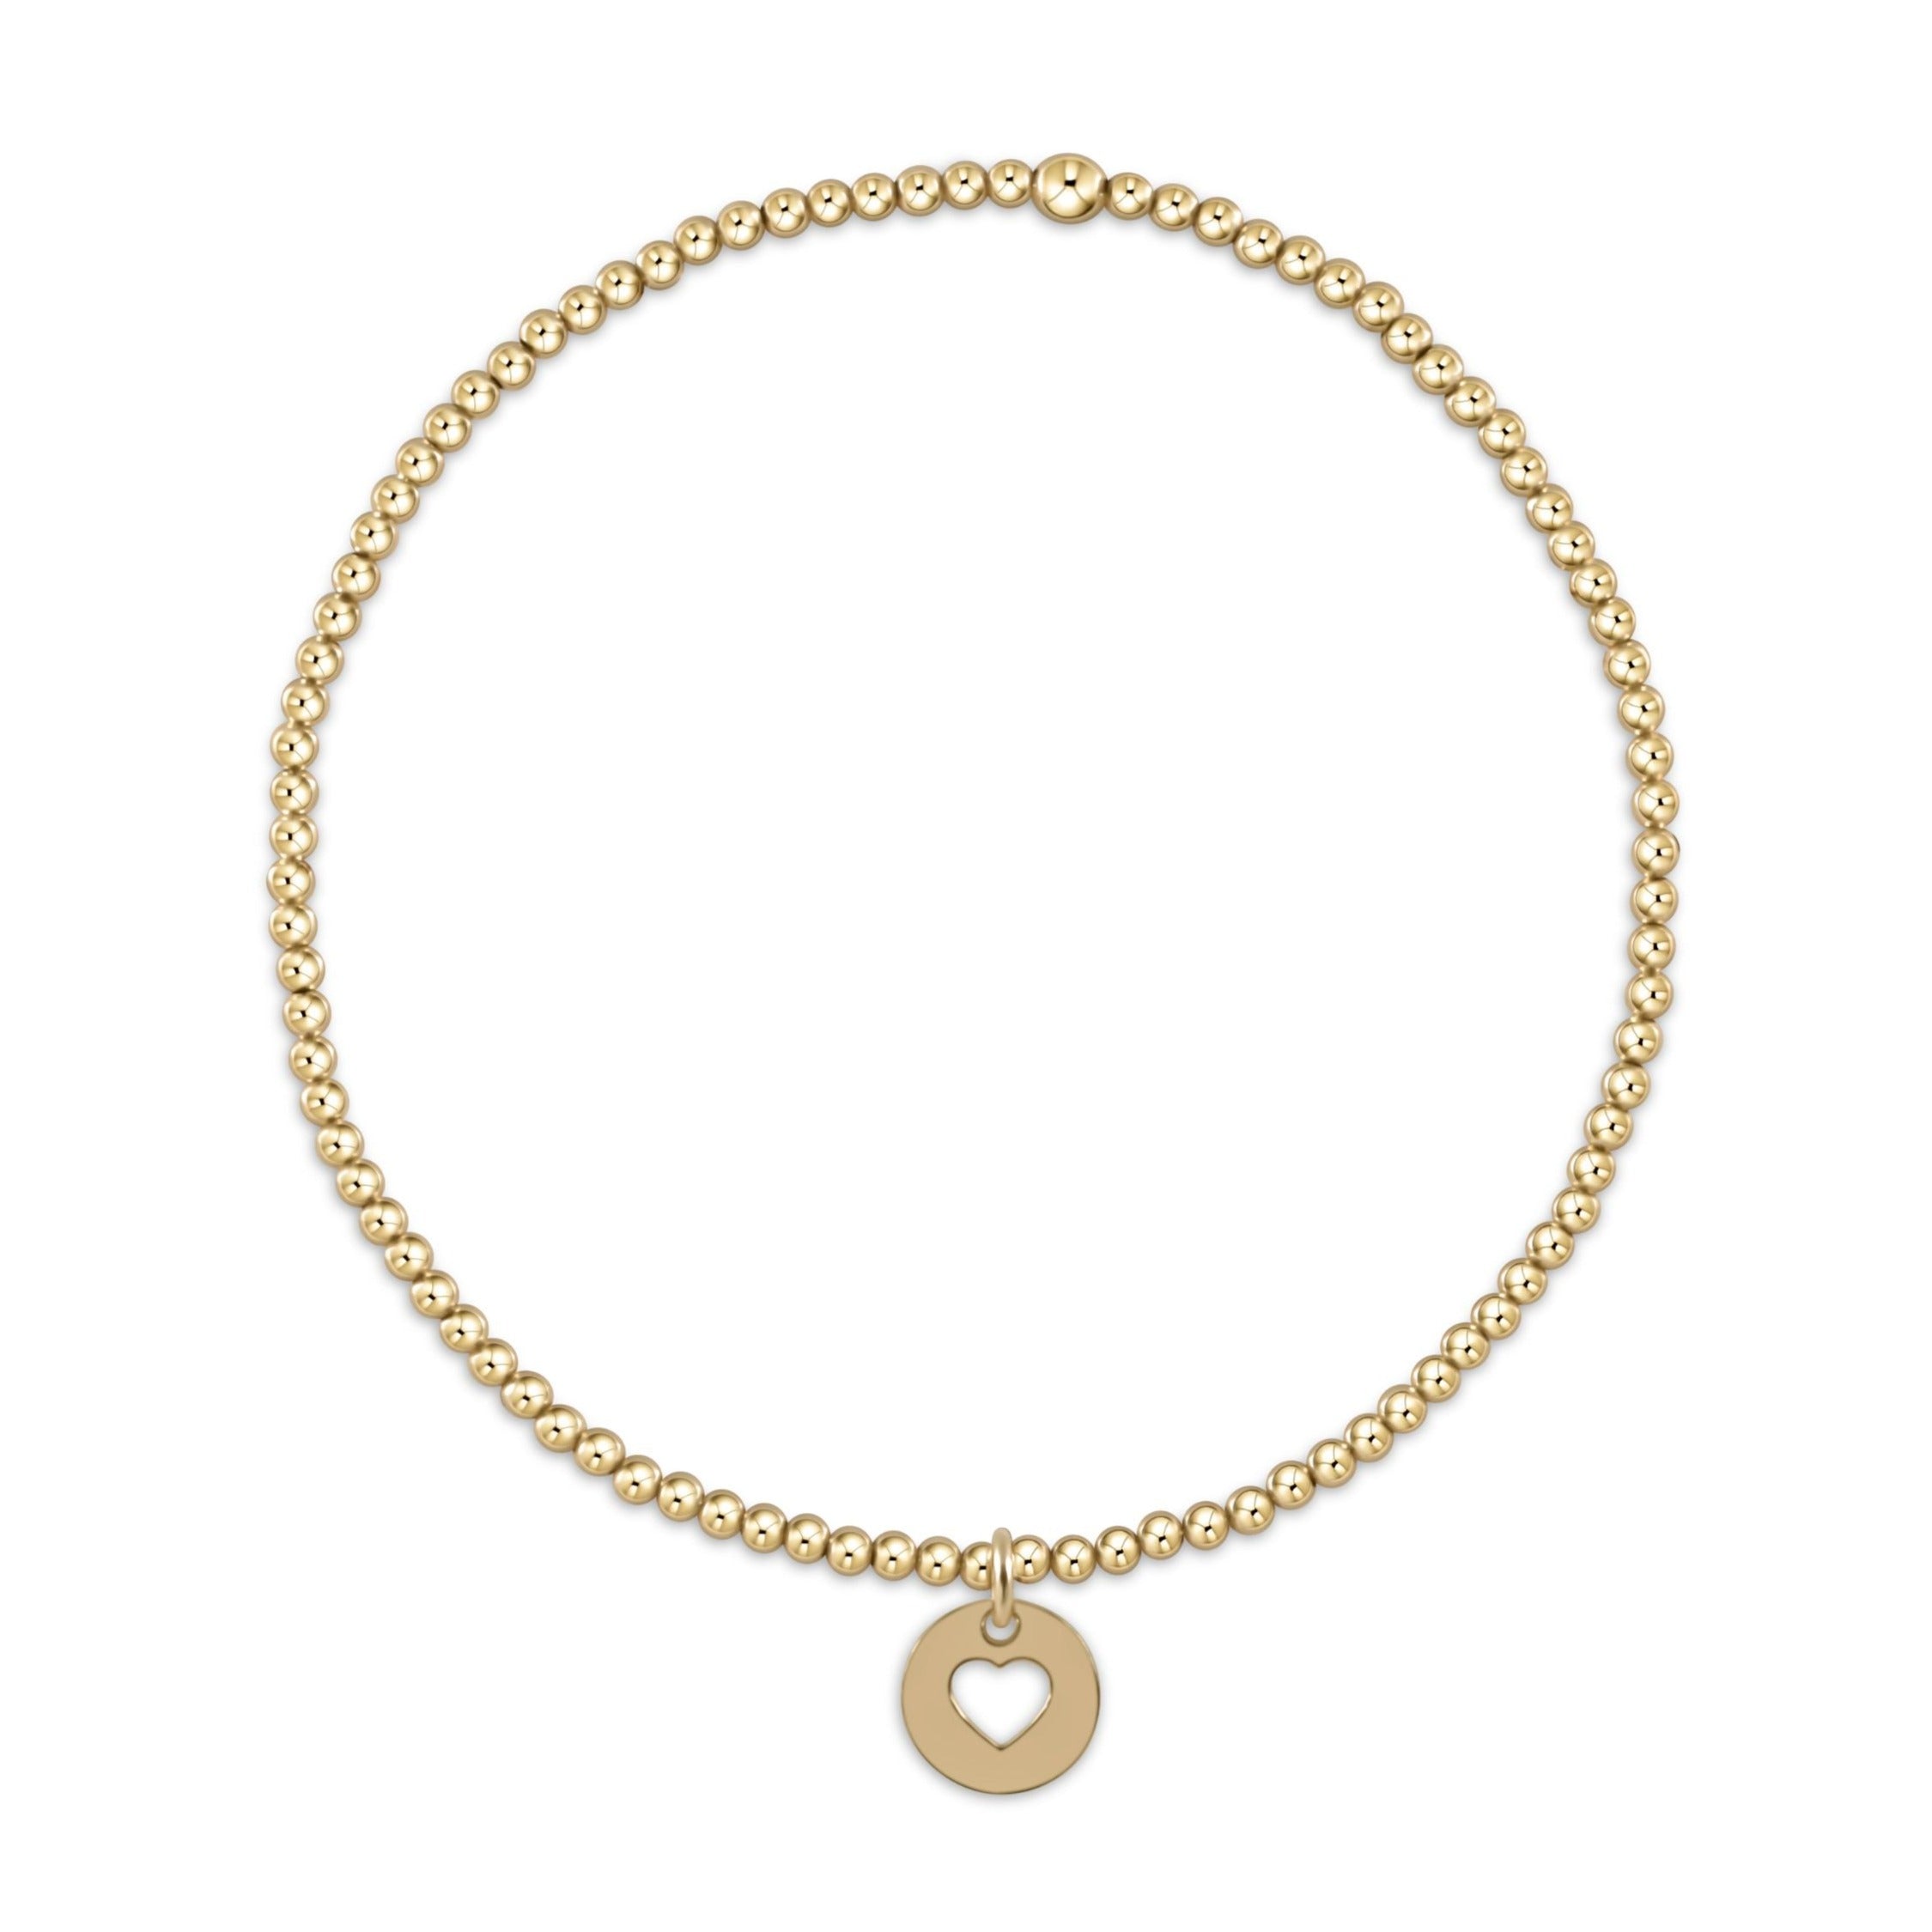 Classic Gold 2mm Bead Bracelet - Love Small Gold Disc